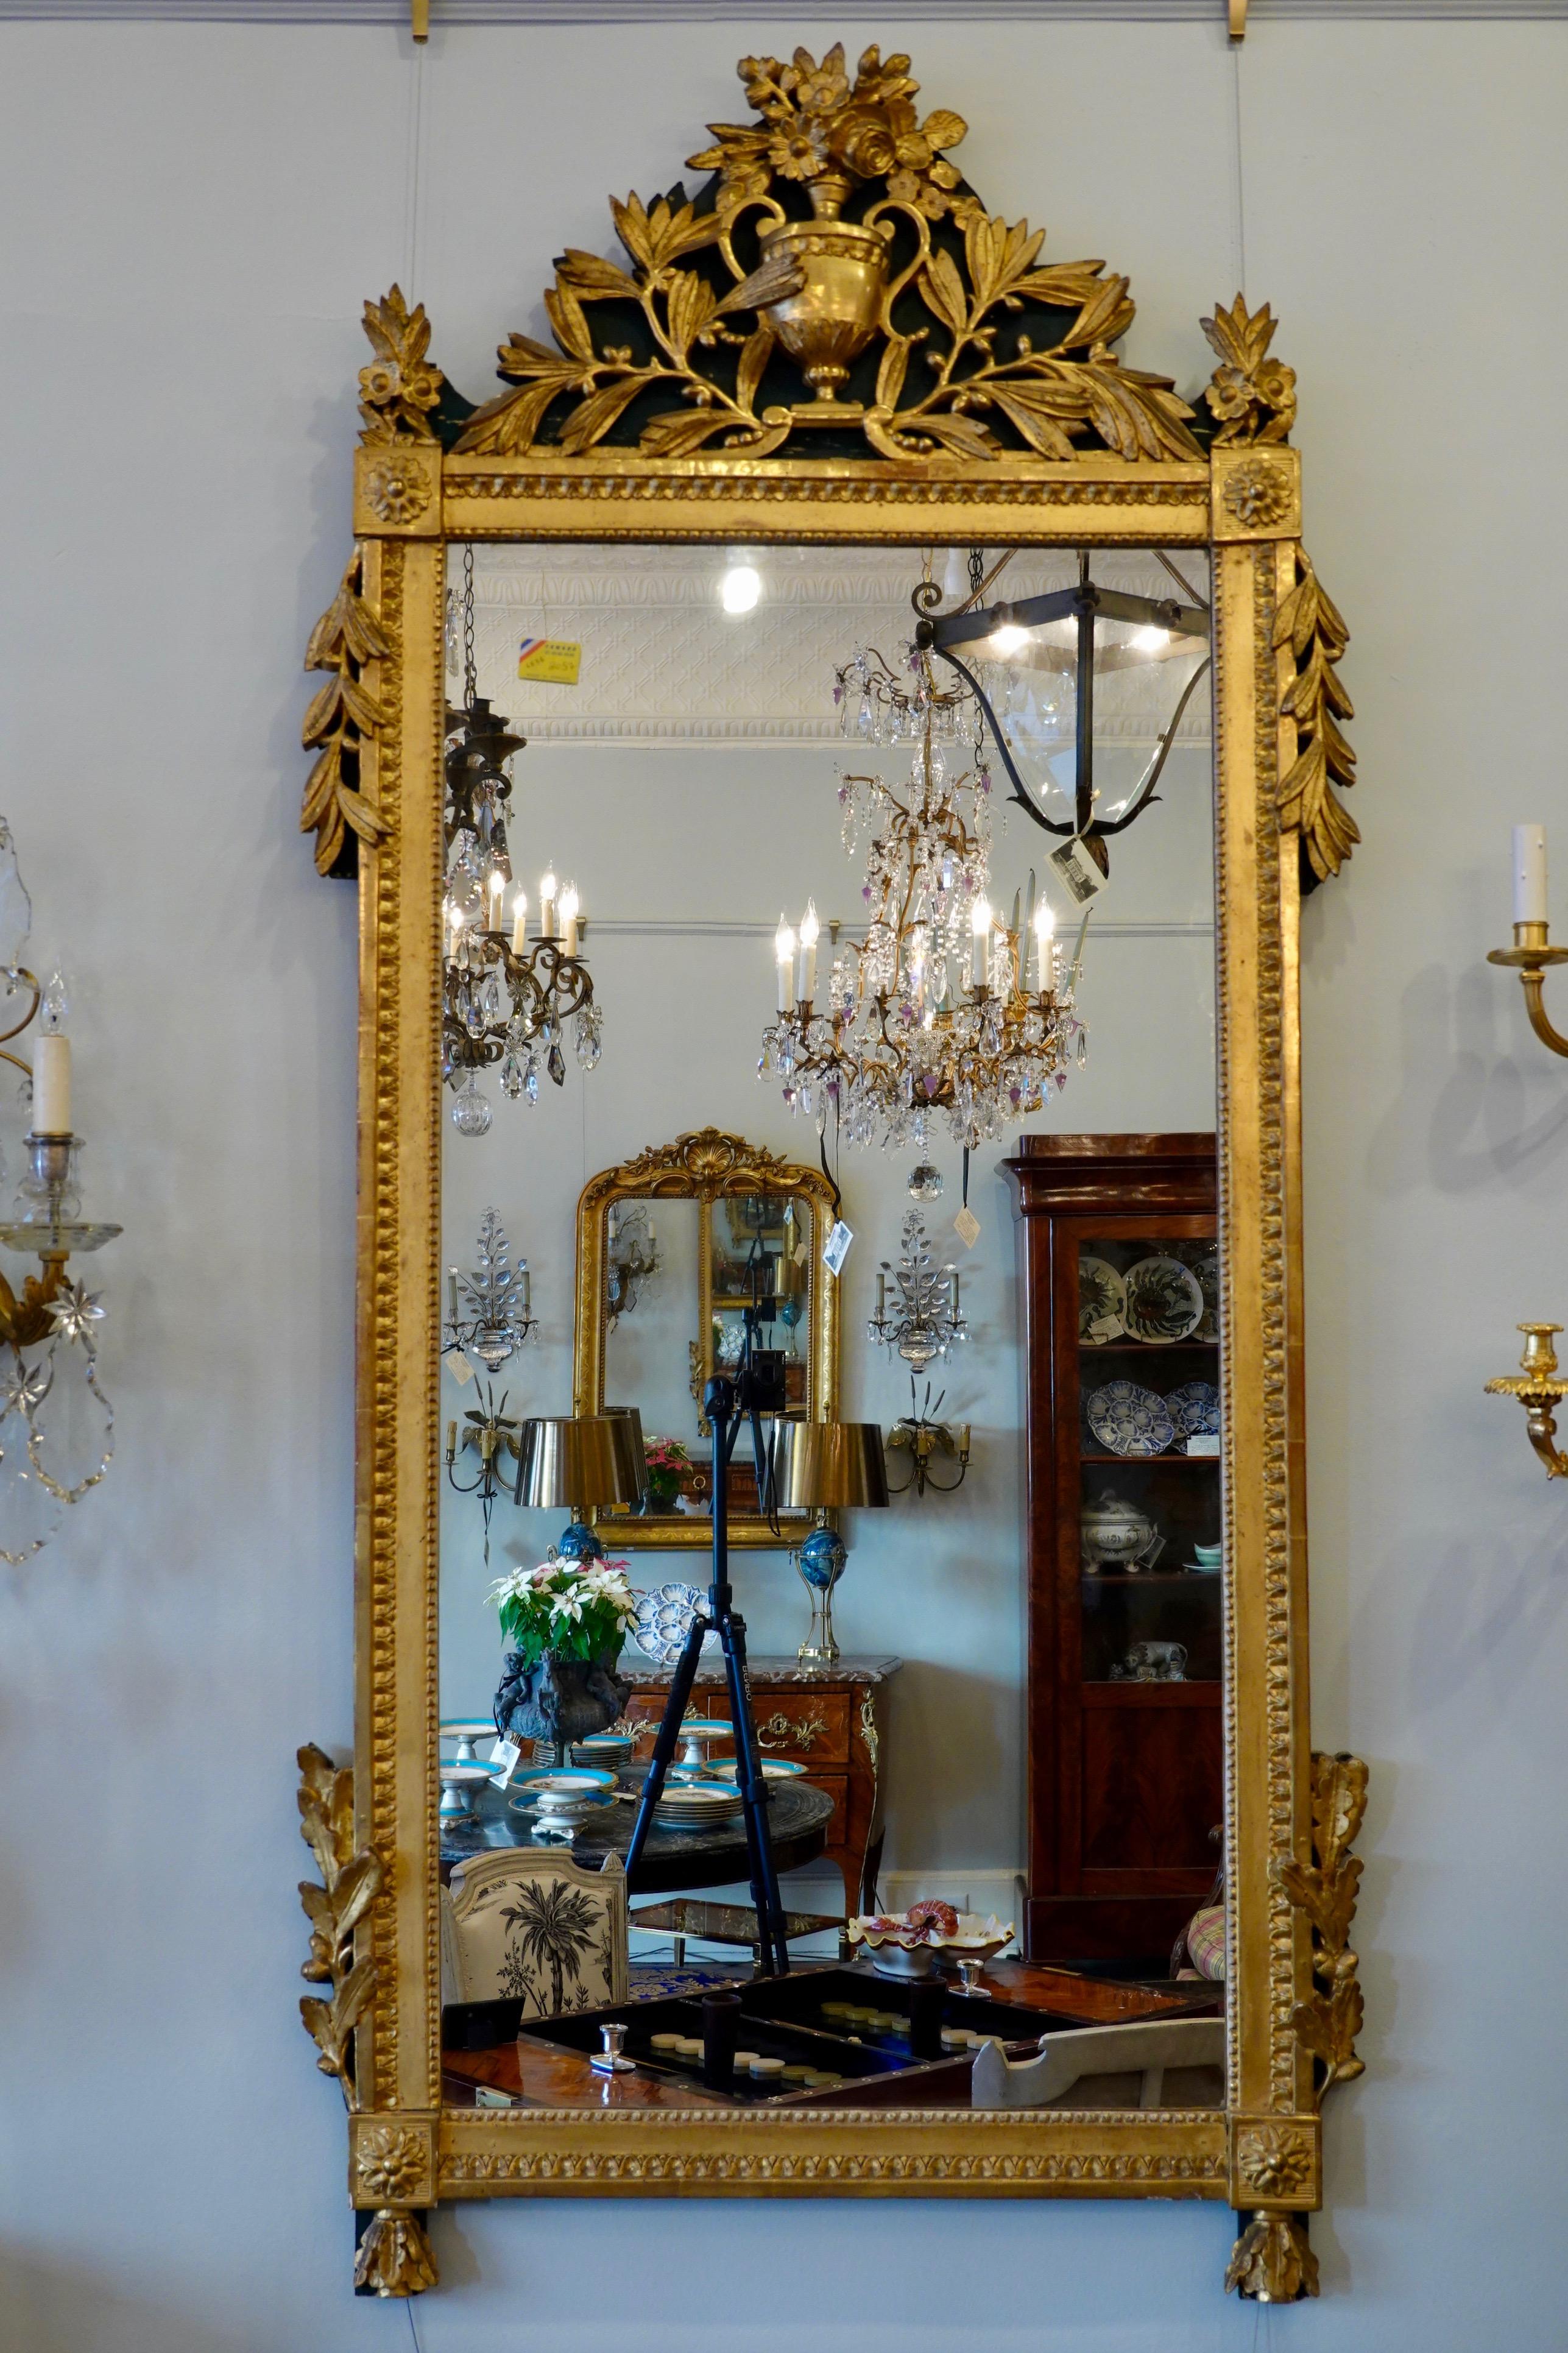 Large French painted and gilded wood trumeau mirror, with lovely, original gilding, highly-detailed neoclassical decoration (Louis XVI period, circa 1780); glass is later. Mirror has a cartouche featuring an urn with spray of flowers, surrounded by